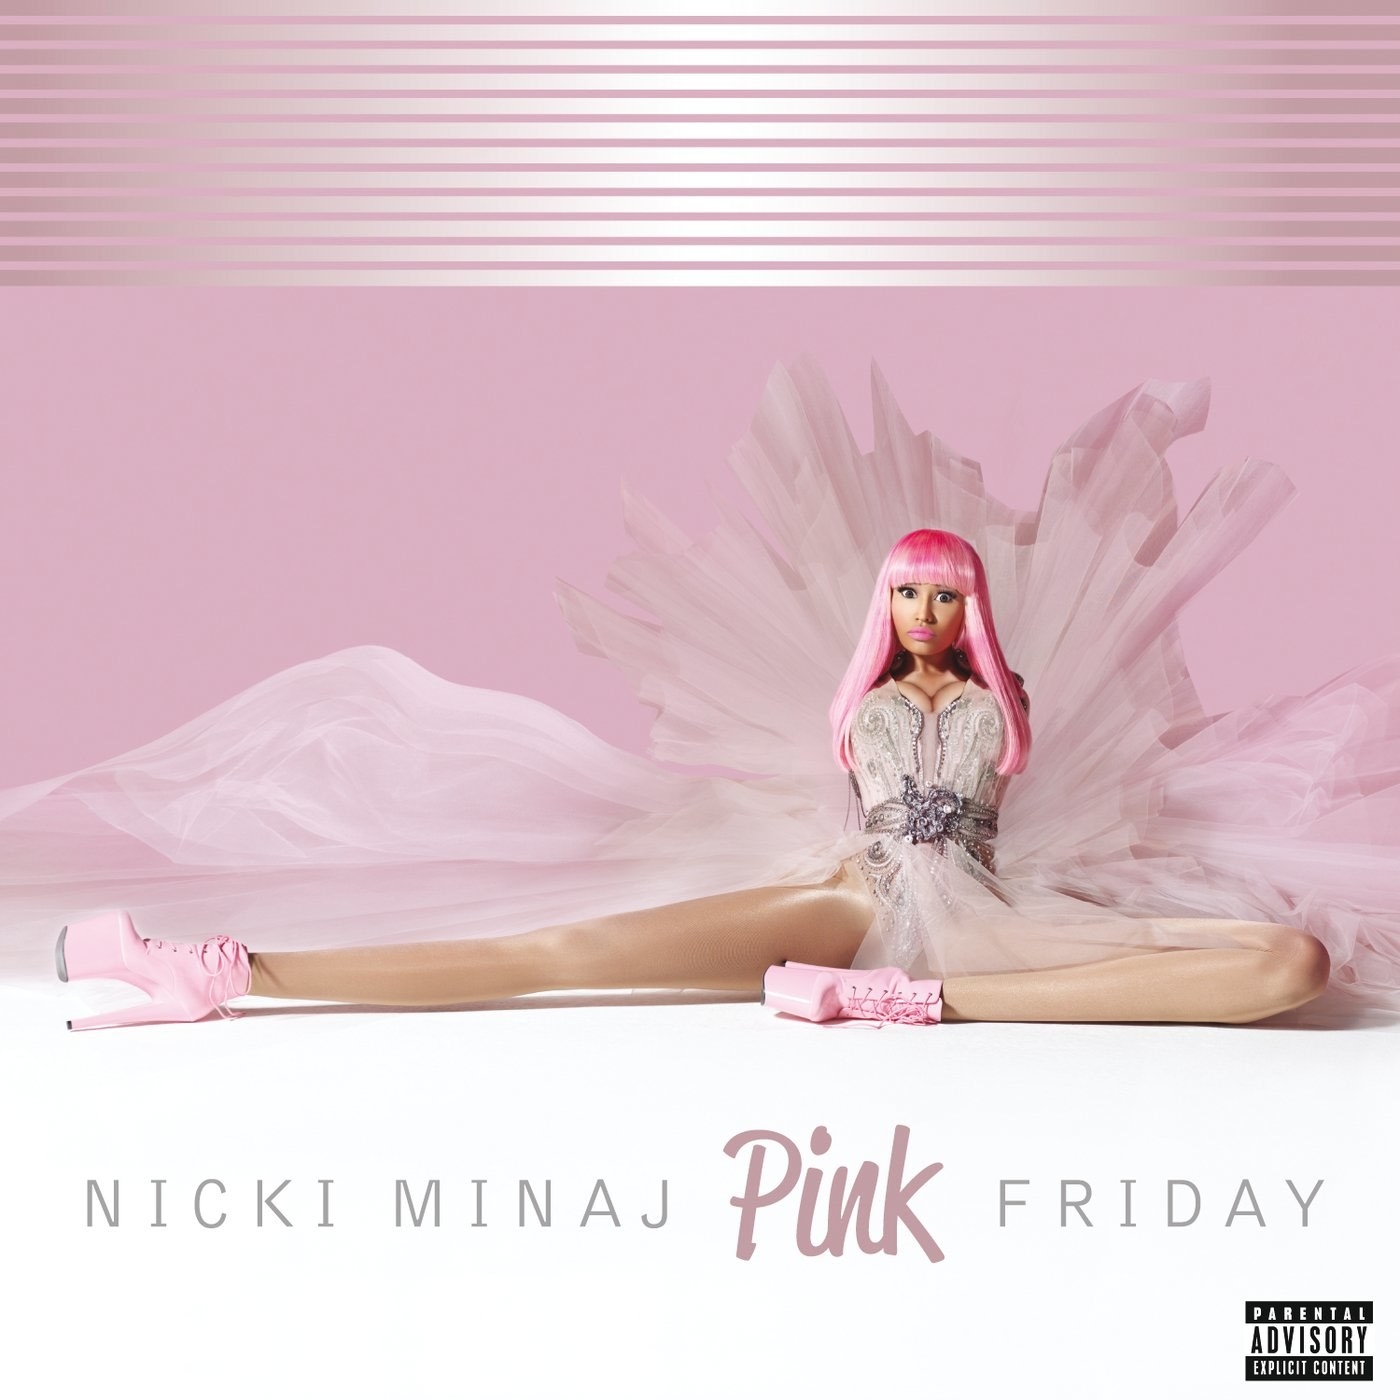 Cover of Pink Friday featuring Nicki in a elegant ballerina type costume sitting on the floor 